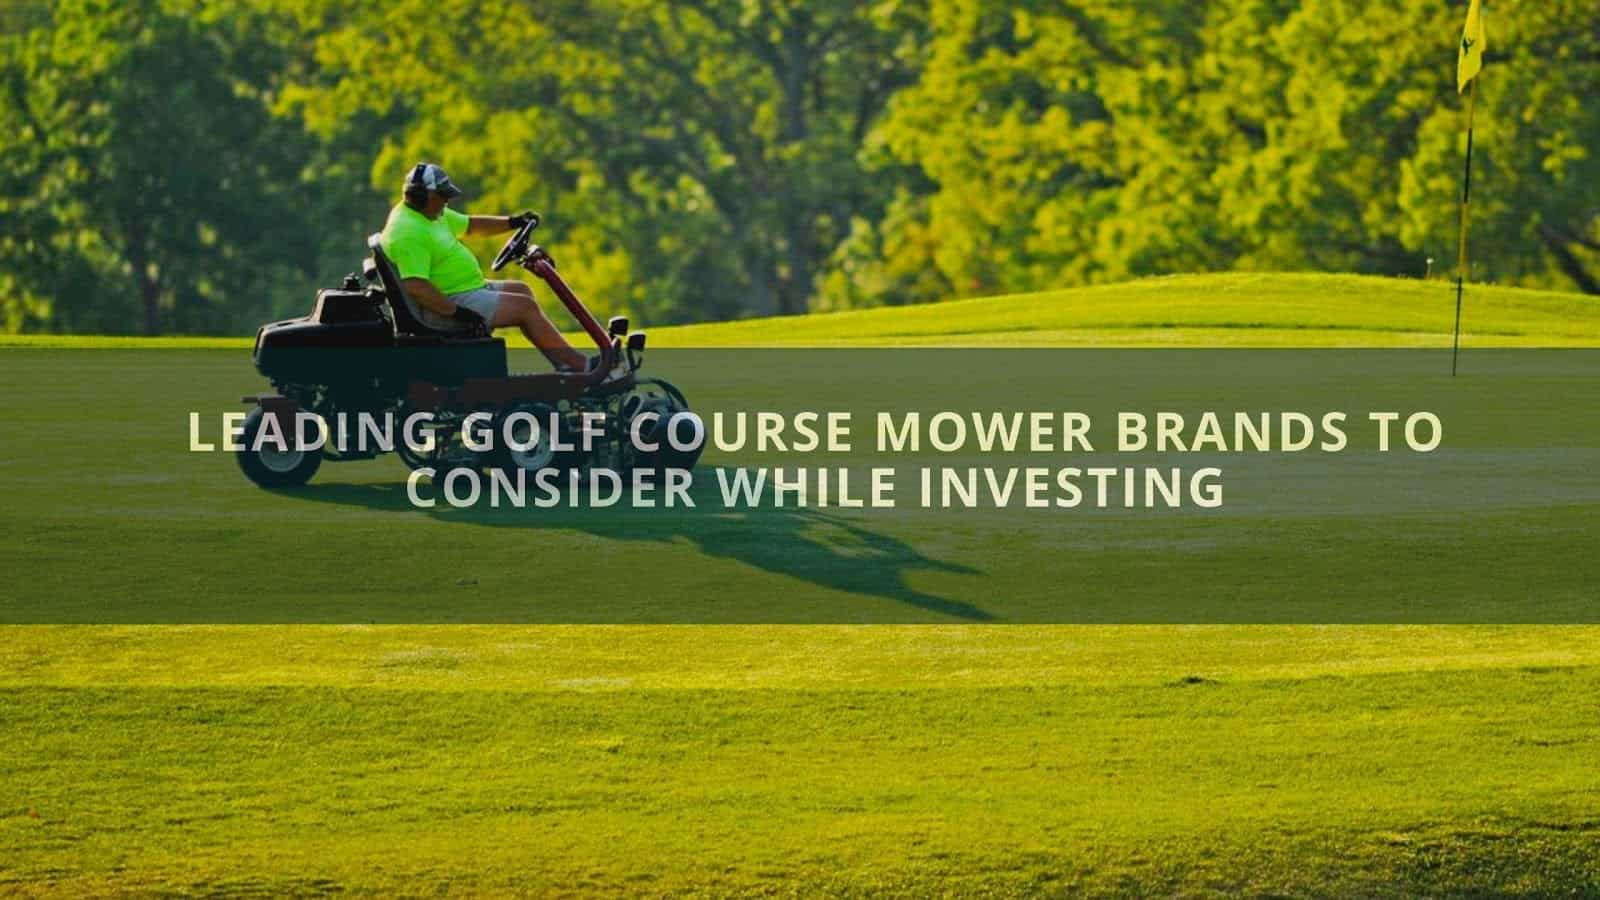 Leading Golf Course Mower Brands to Consider While Investing